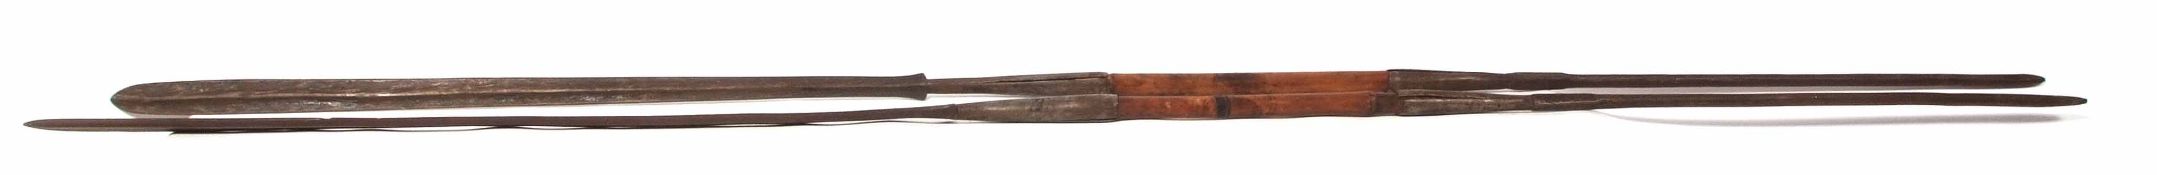 **Two 20th century African assegai spears, each of typical form with elongated double sided blades